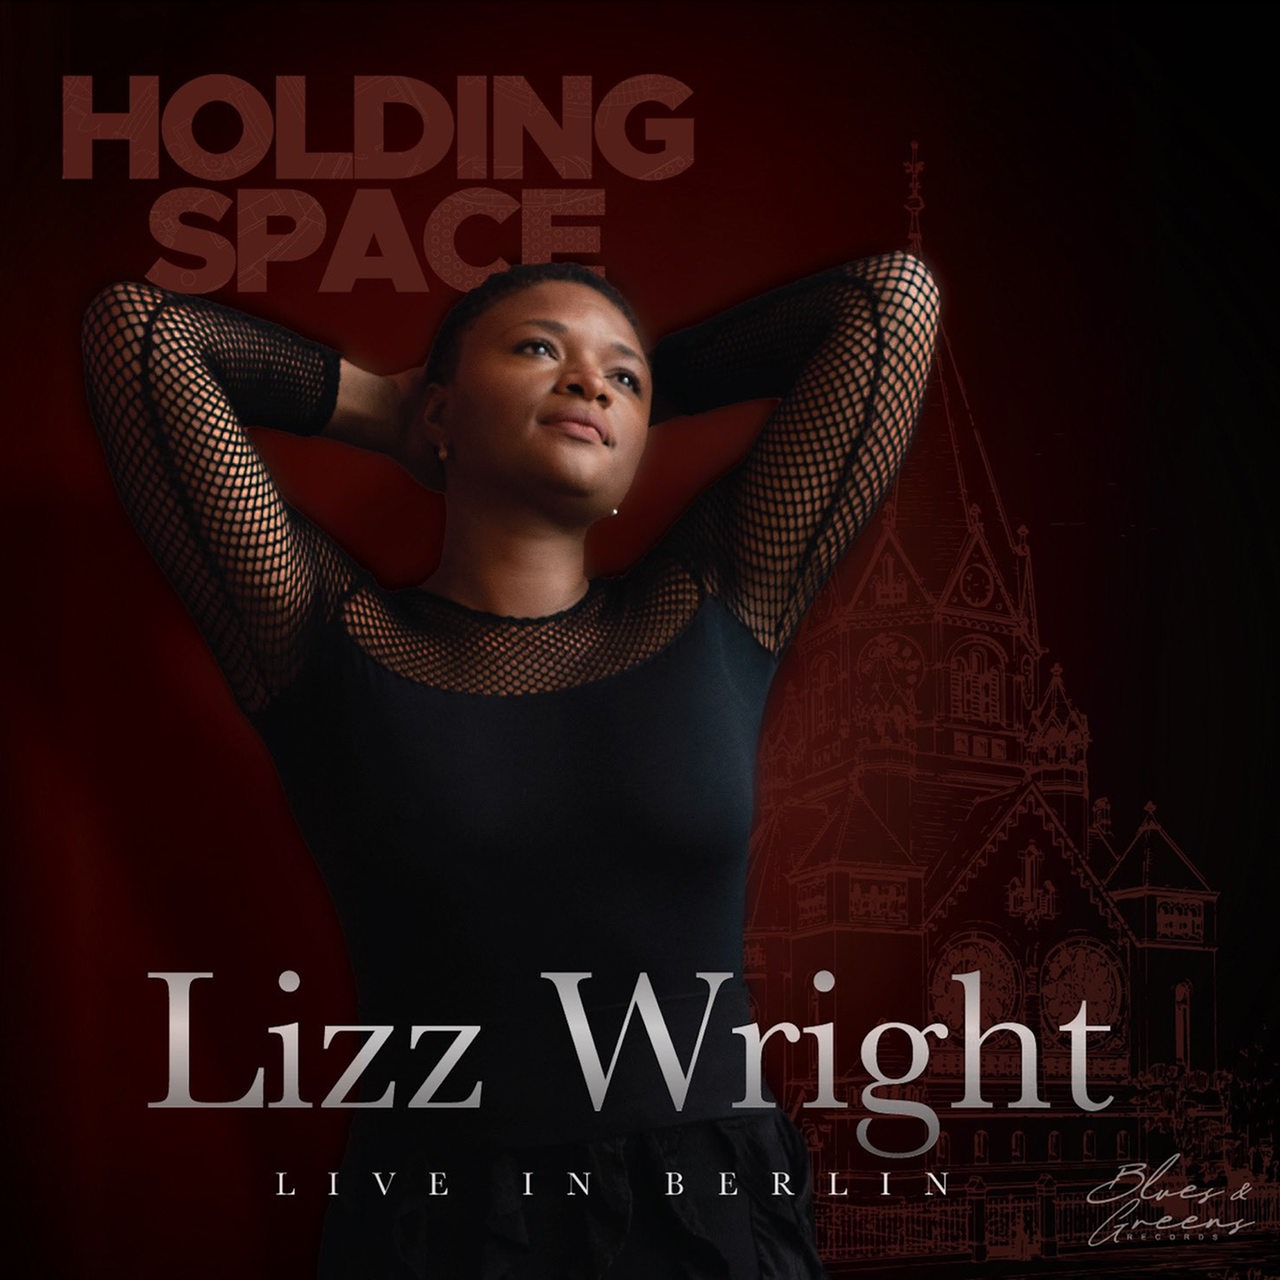 Albumcover "Lizz Wright – Holding space (Live in Berlin)"